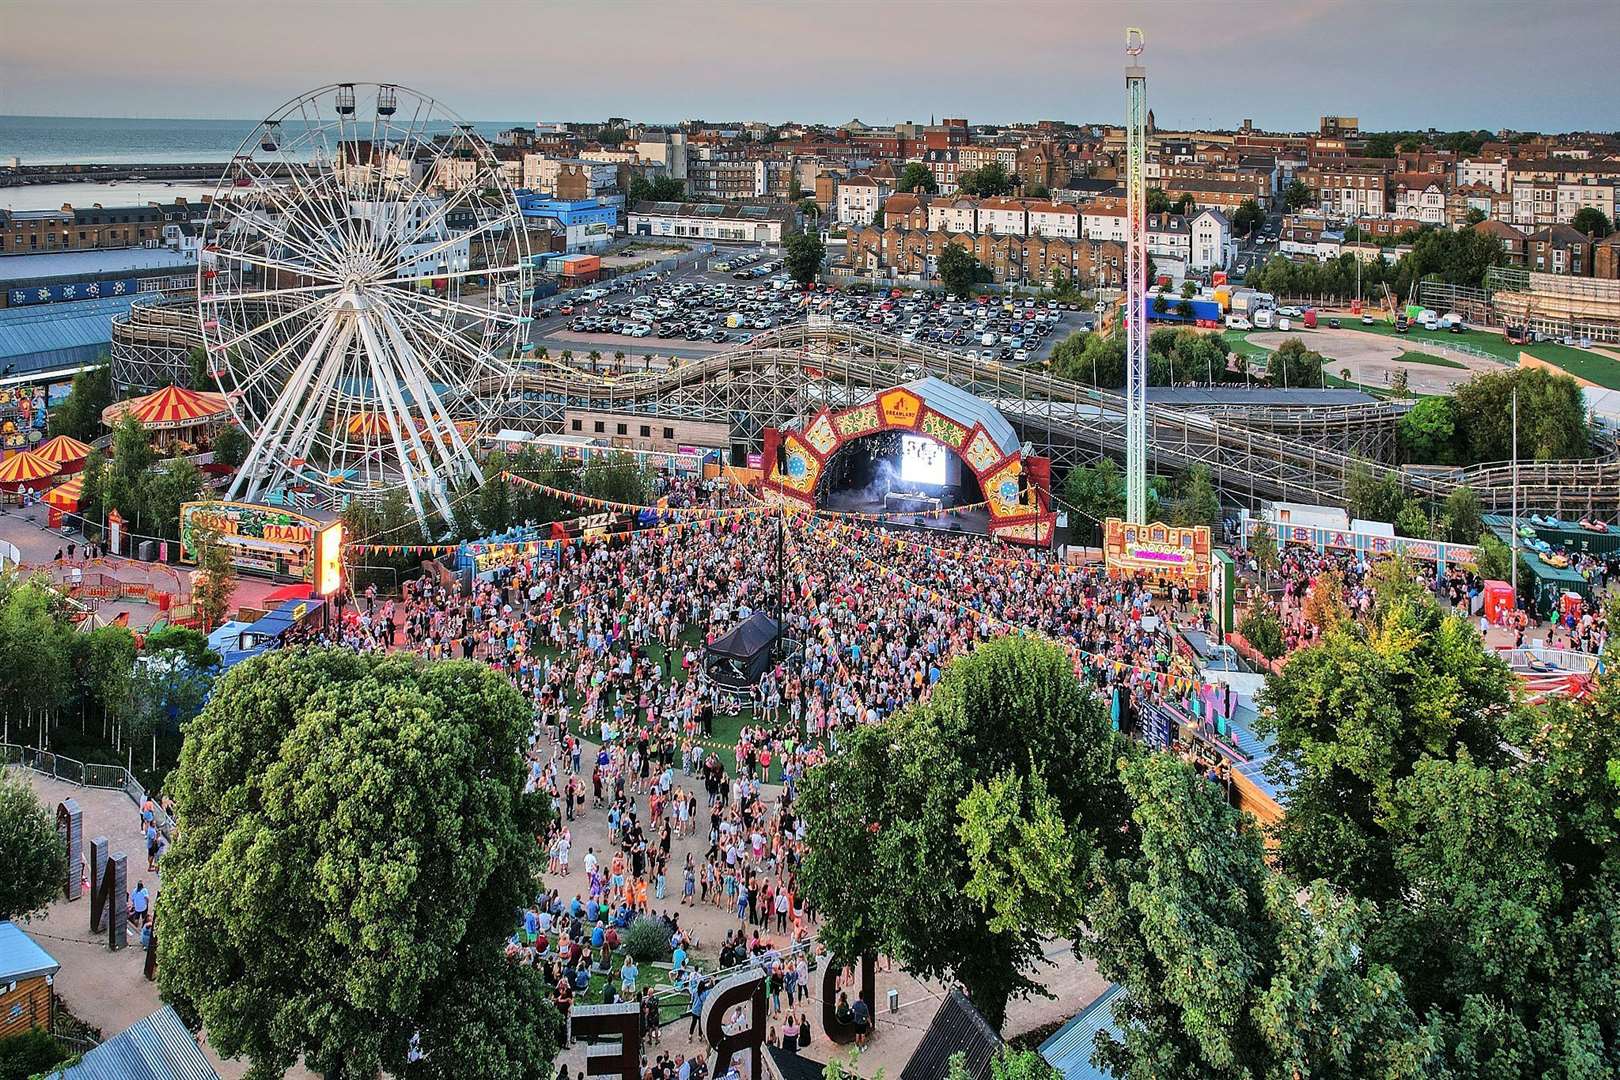 Dreamland in Margate will host a huge emergency service training exercise. Picture: Dreamland